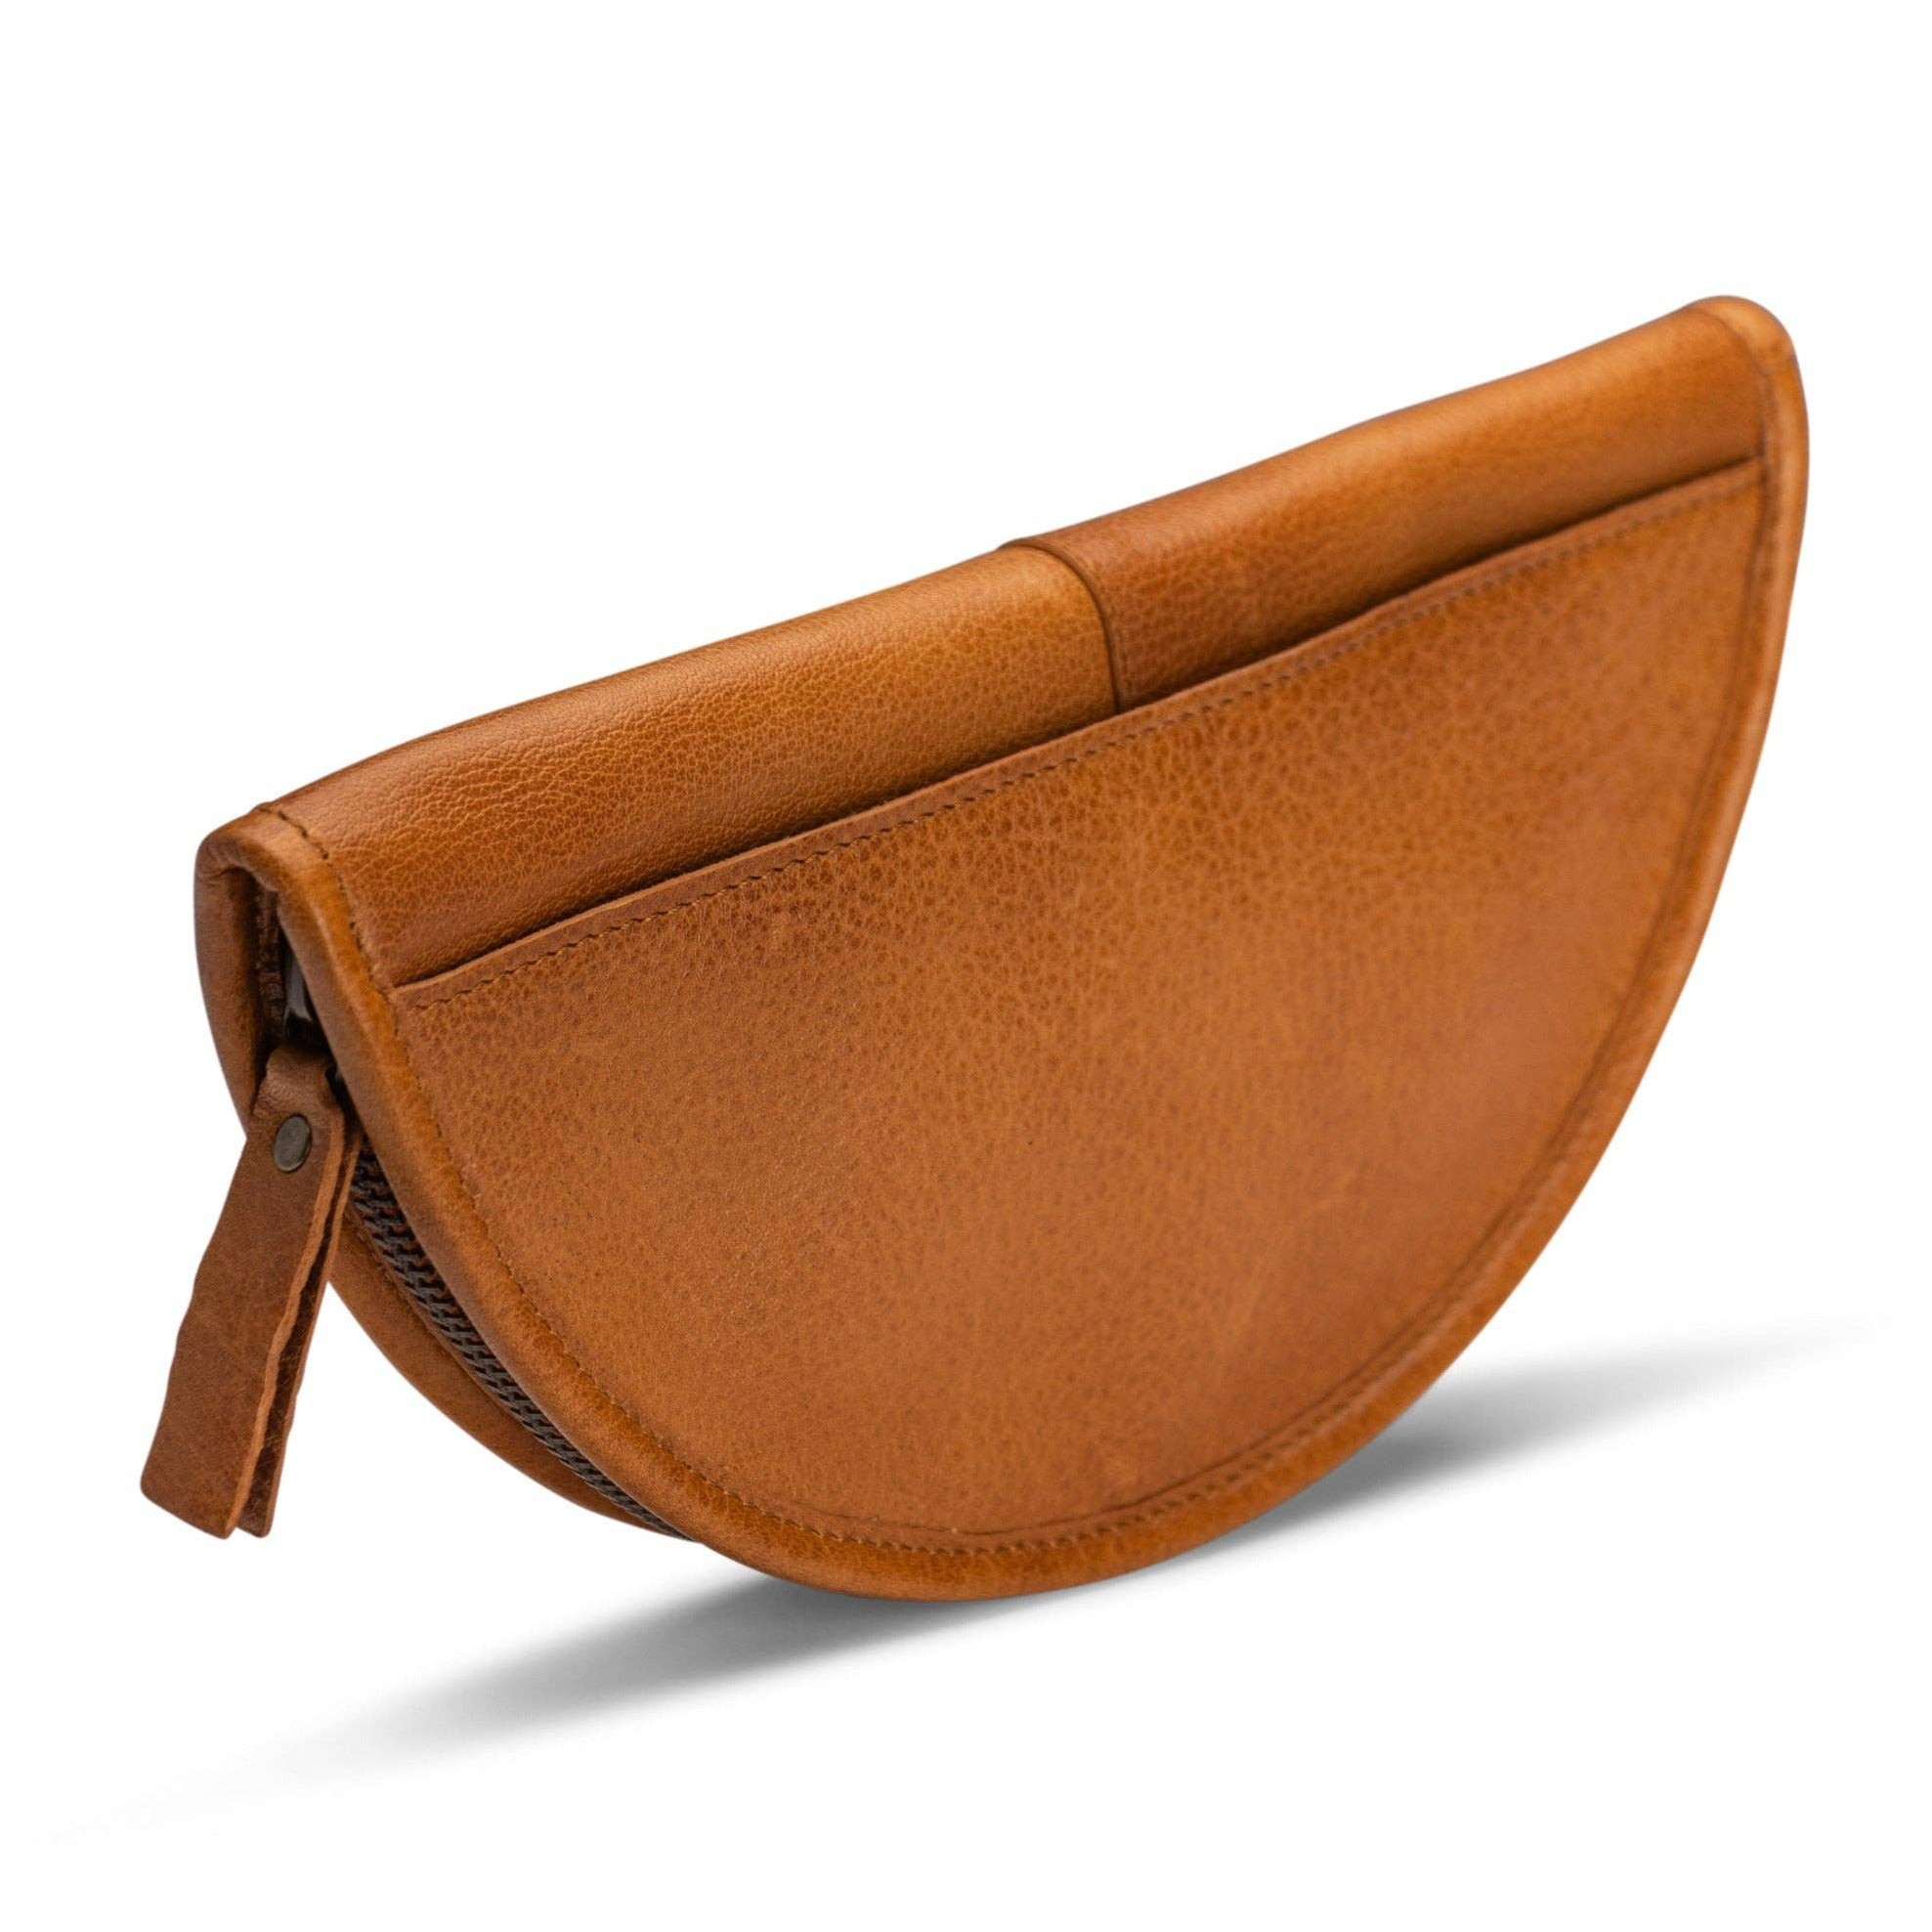 muud Dian - Leather Case for Interchangeable Needles